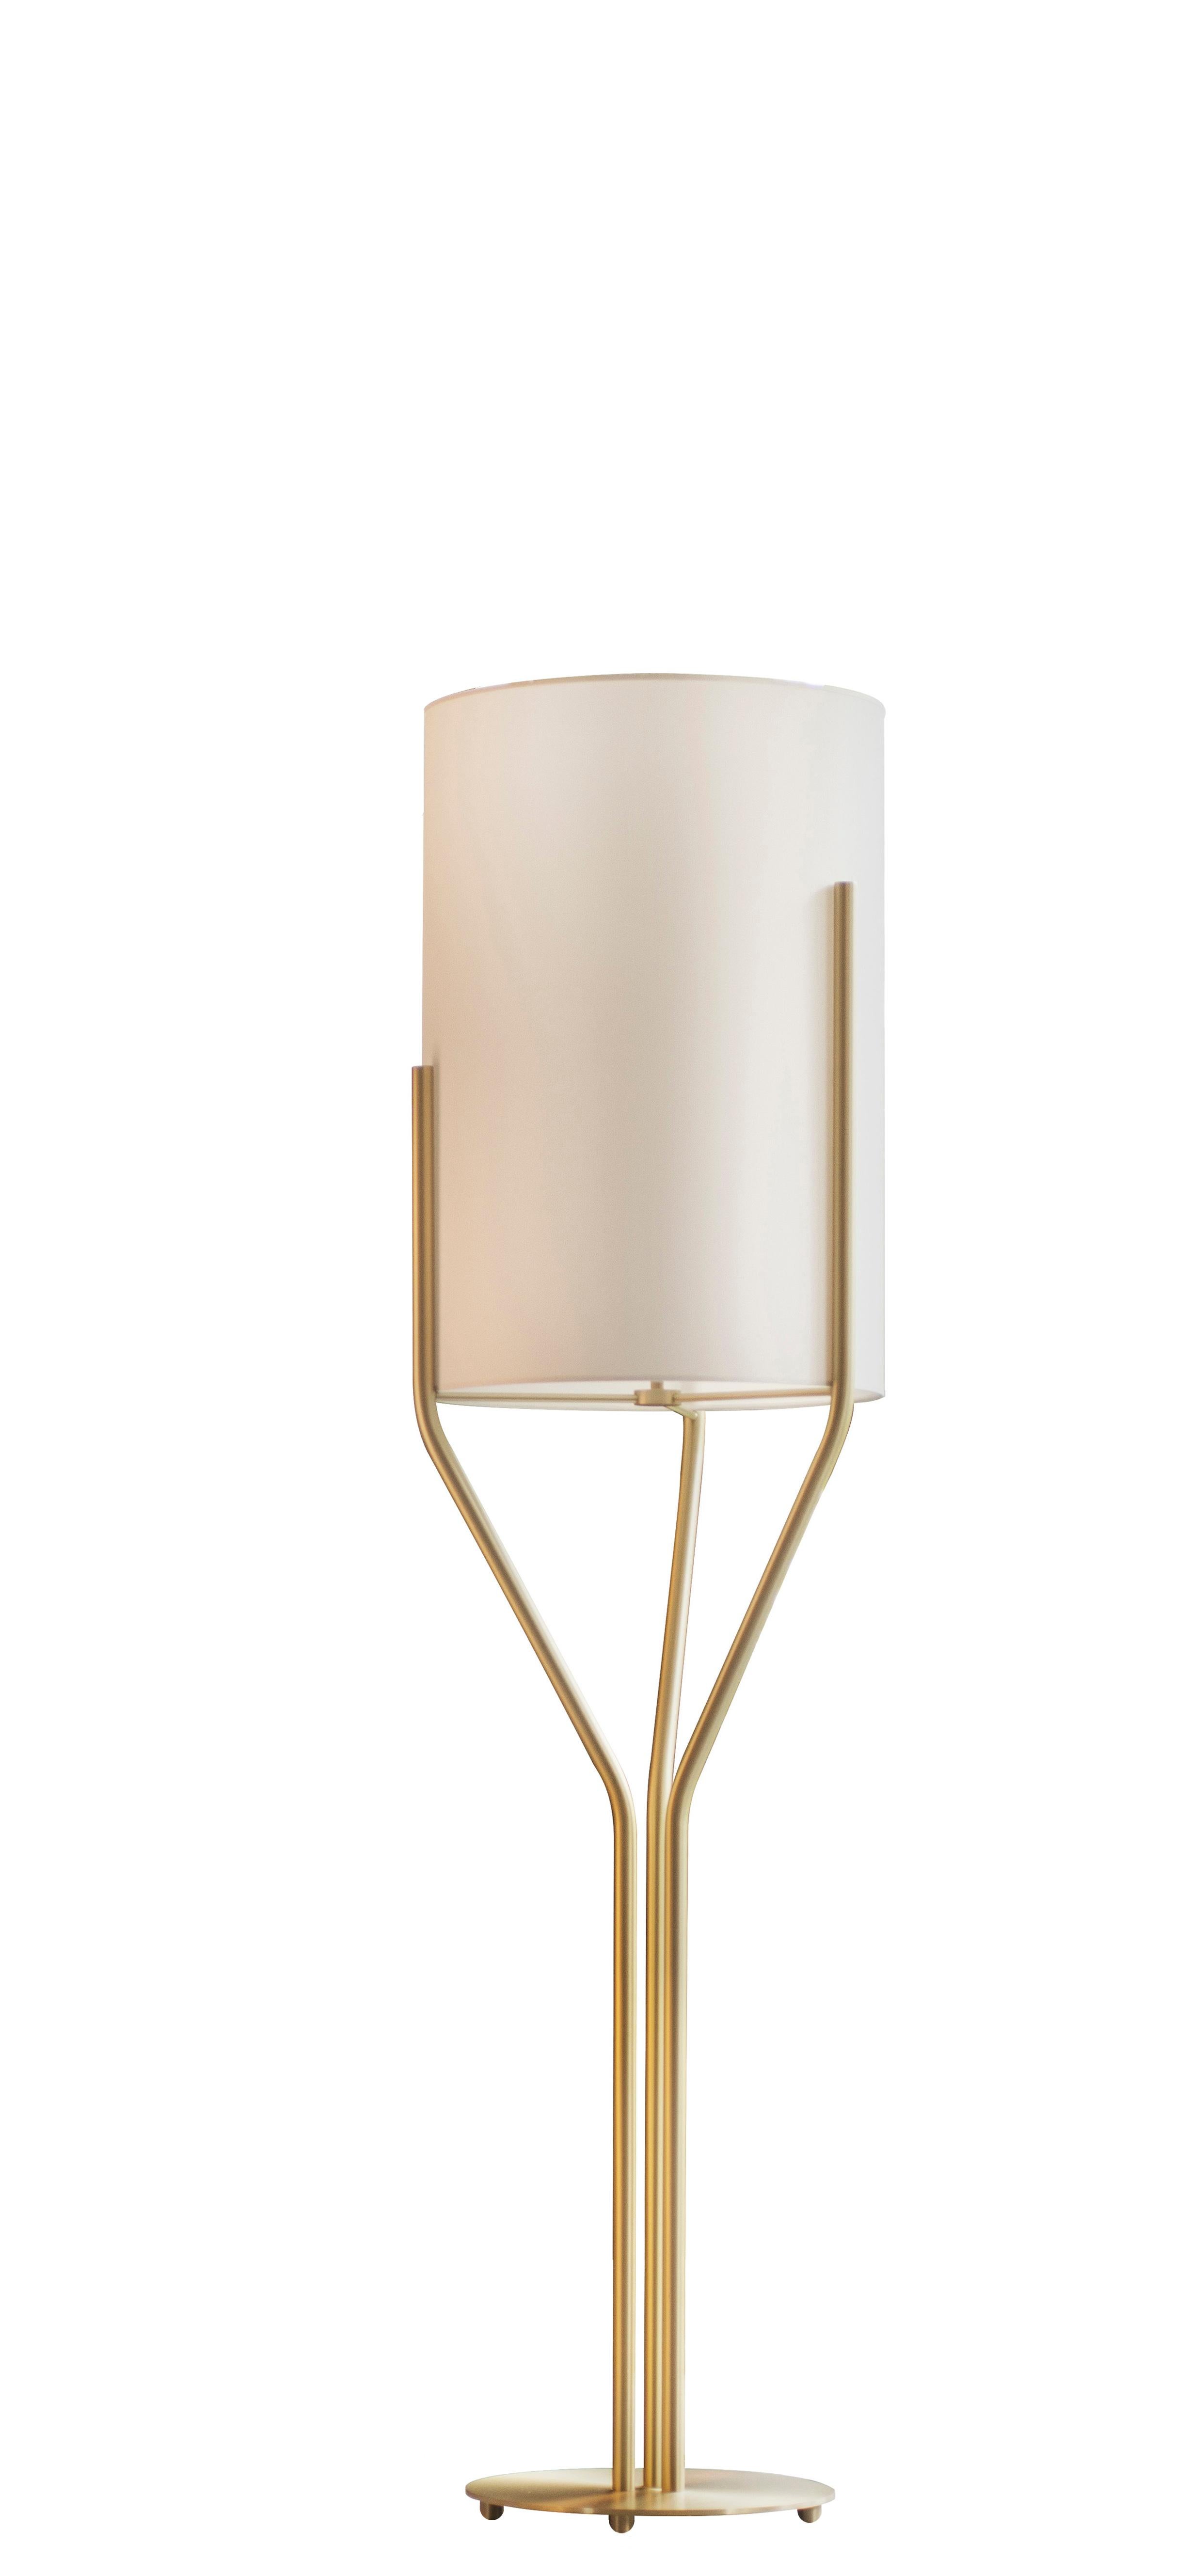 French Set of 3 Arborescence Satin Brass Floor Lamps by Hervé Langlais For Sale